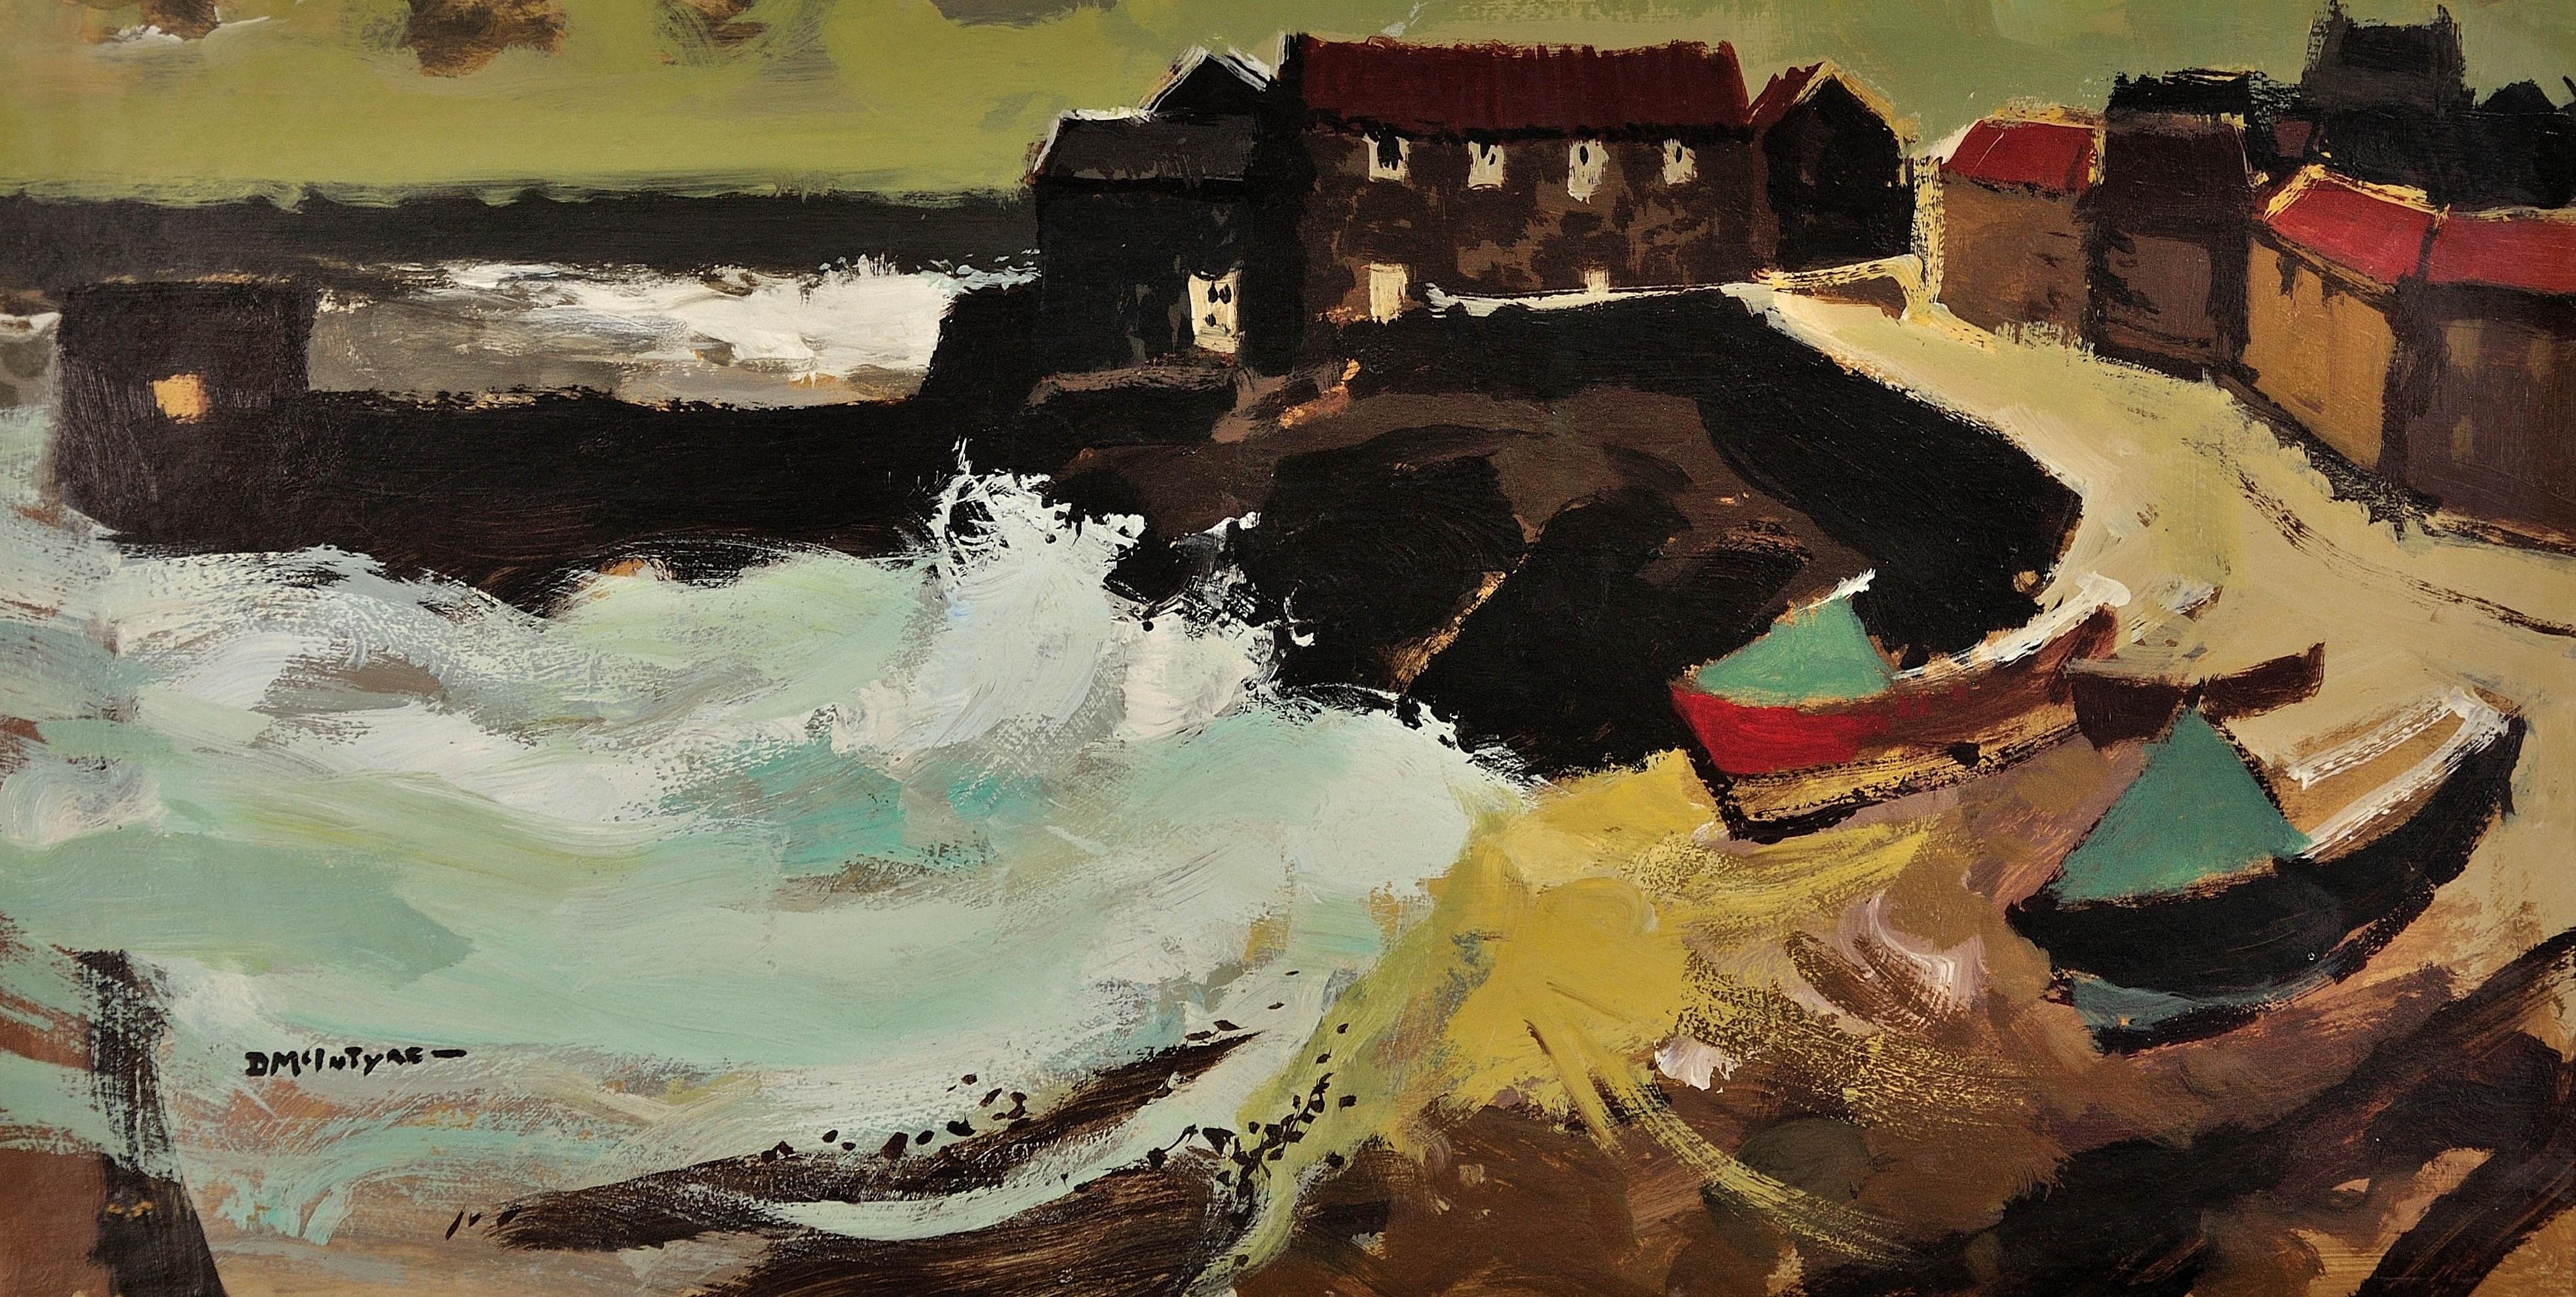 Stormy Day, Craster, Northumberland. Modern British. Scottish Colorist Tradition - Painting by Donald McIntyre